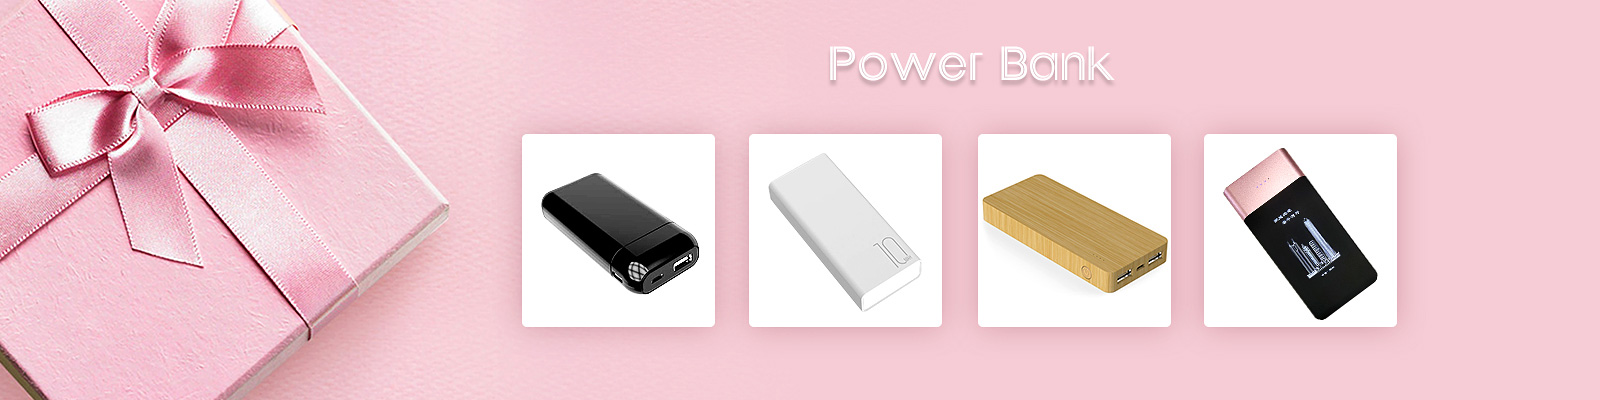 Cell phone power bank | Power bank portable charger | leadway group limited